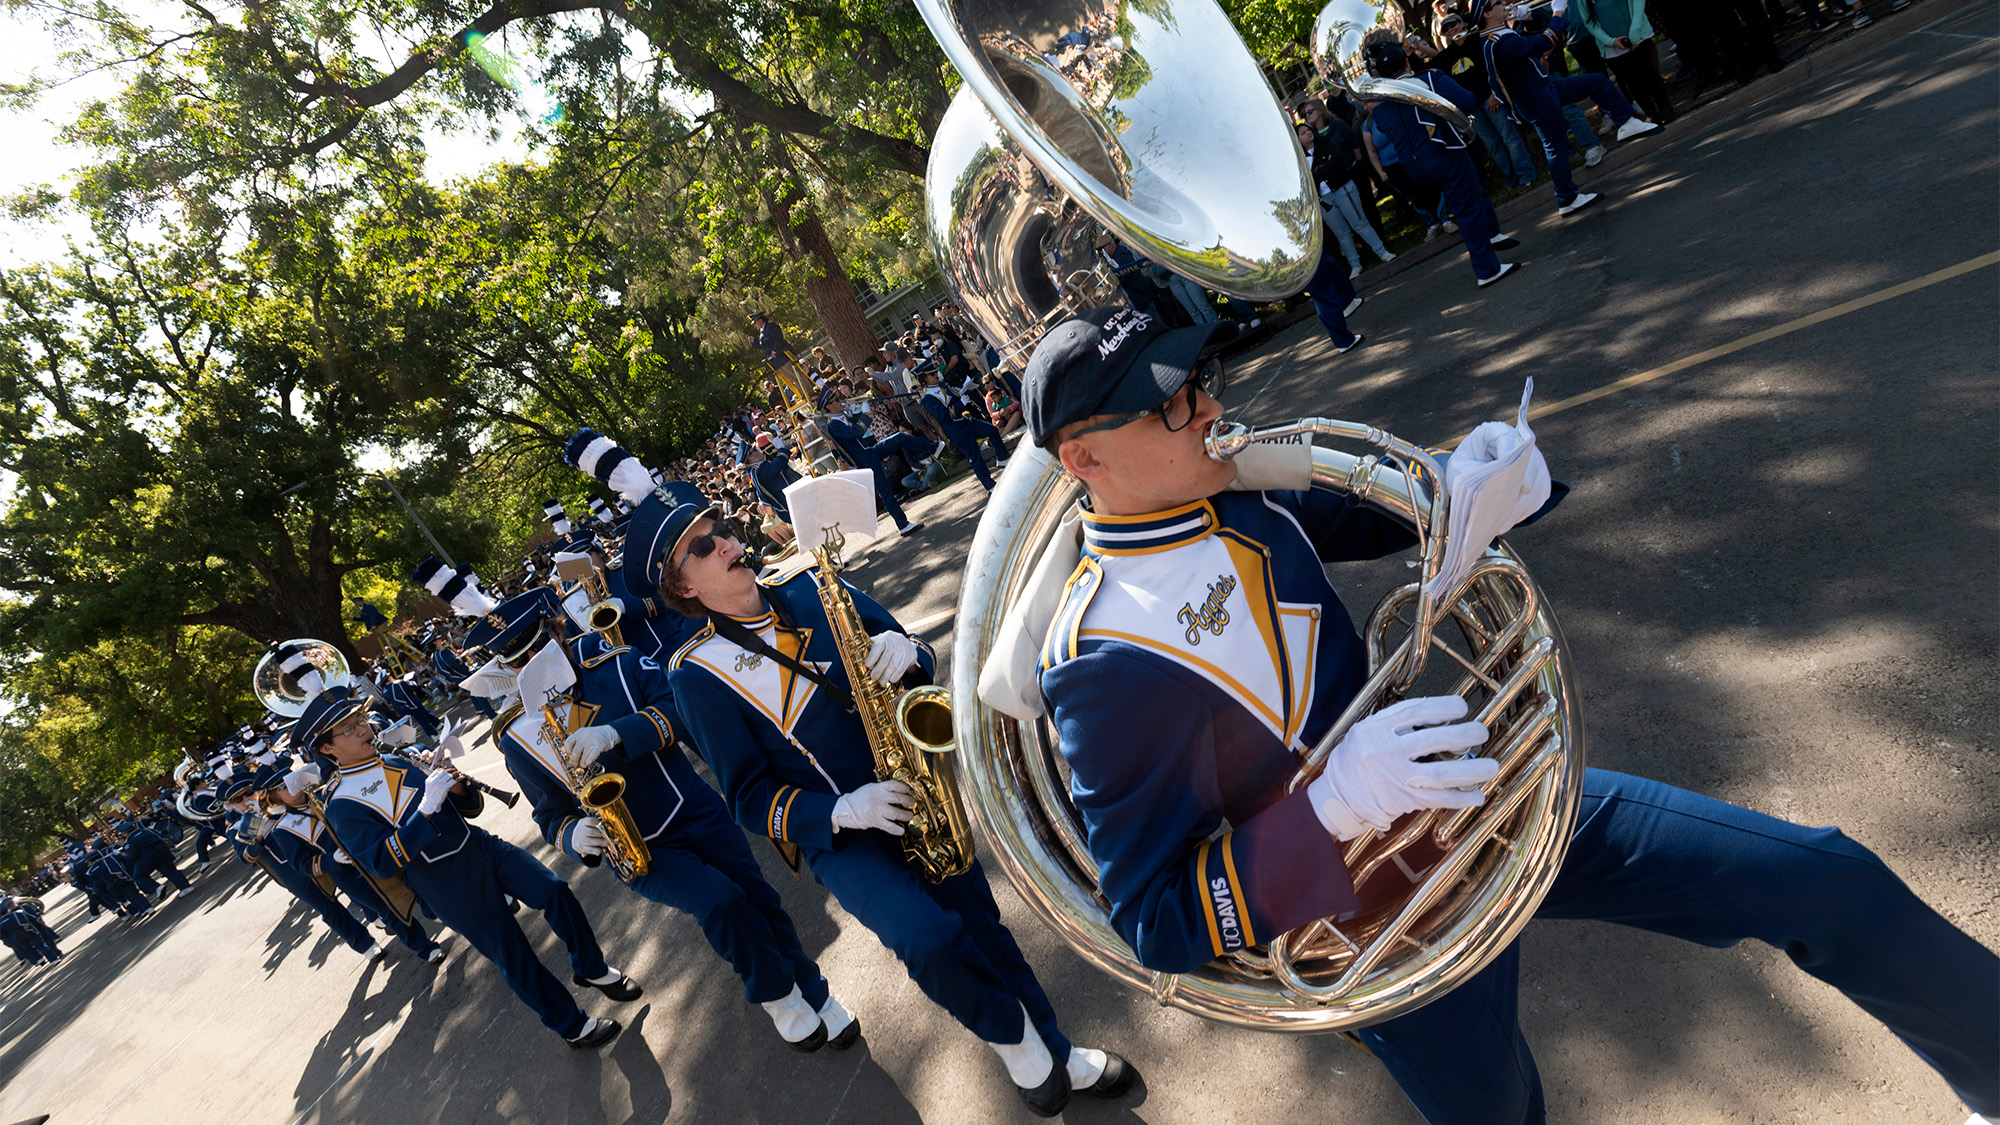 Marching band members participate in the Picnic Day parade.